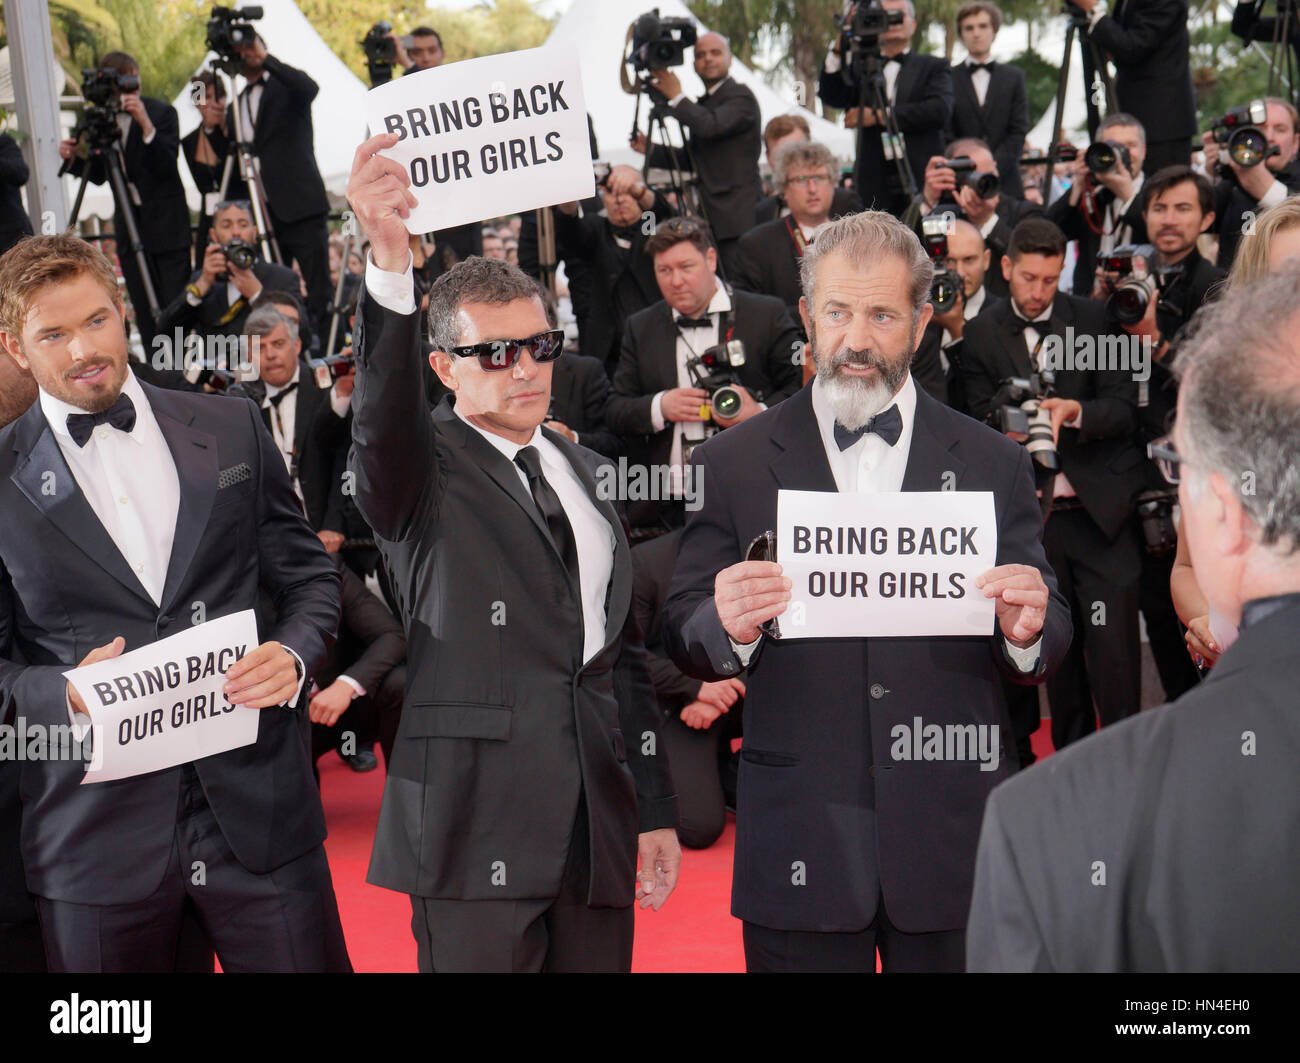 The cast of Expendables 3, Kellan Lutz, Antonio Banderas,  and Mel Gibson hold up Bring Back Our Girls signs  on the red carpet at the Cannes Film Festival on May 18, 2014, in Cannes, France.  Photo by Francis Specker Stock Photo